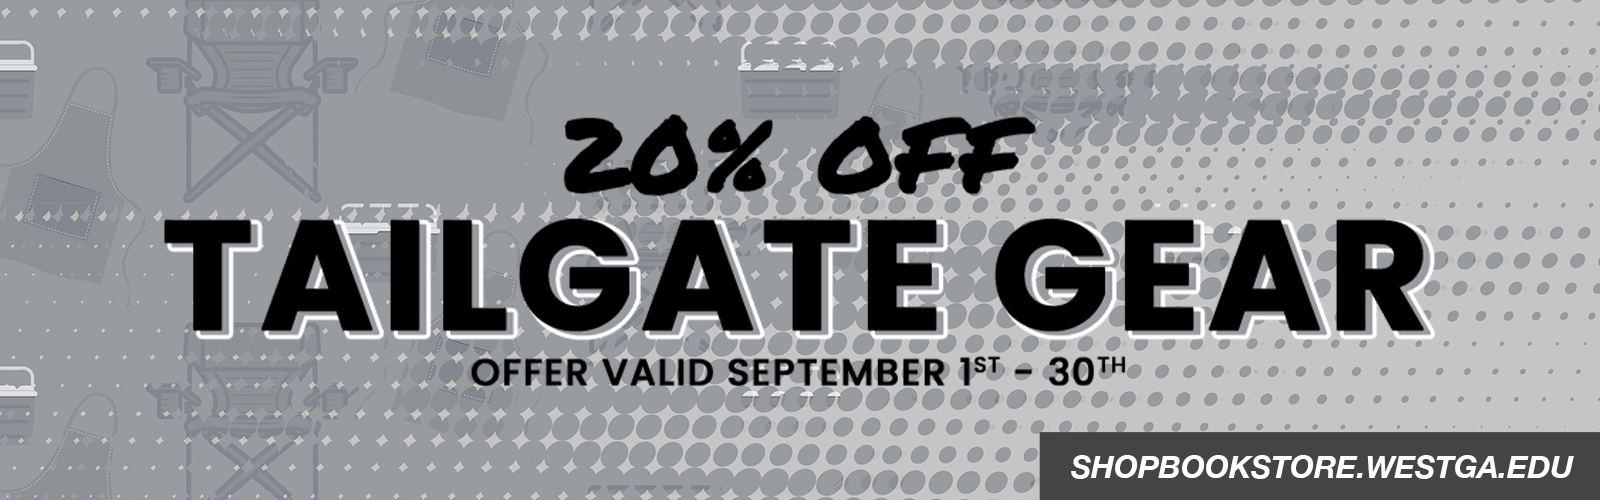 20% off of tailgating gear on shopbookstore.westga.edu. Offer is valid from September 1st through September 30th.